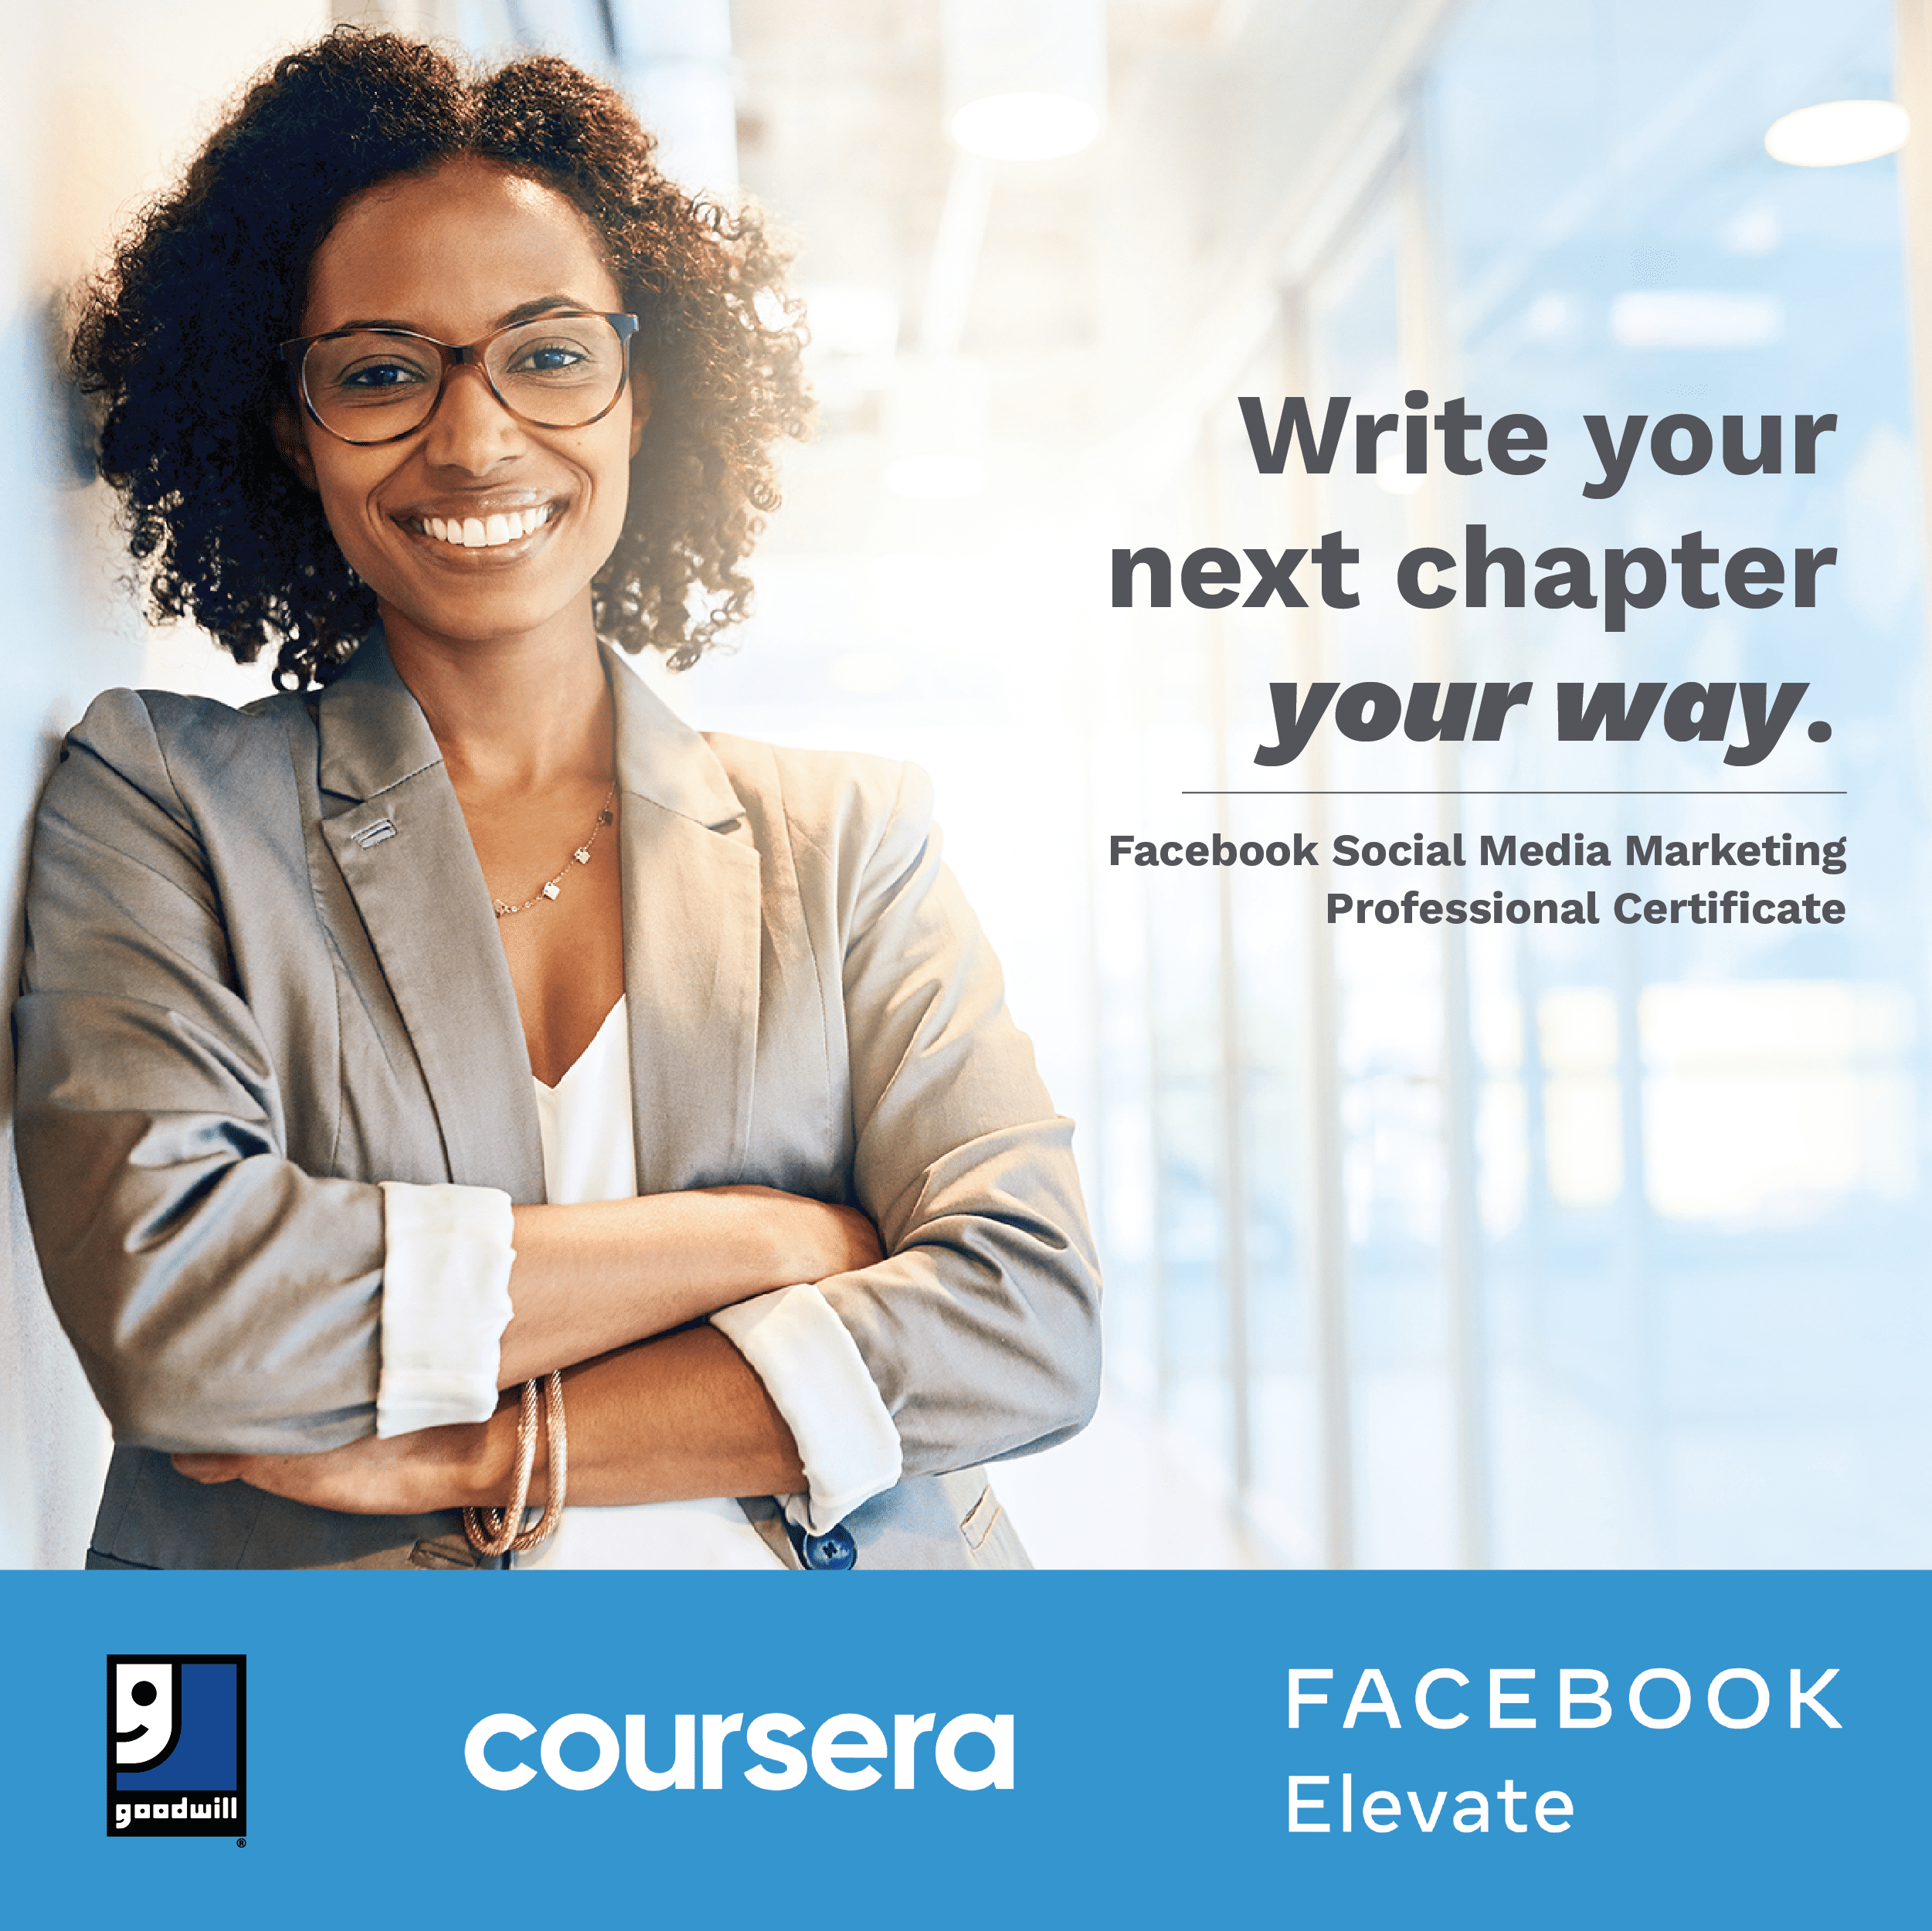 facebook coursera goodwill event graphic